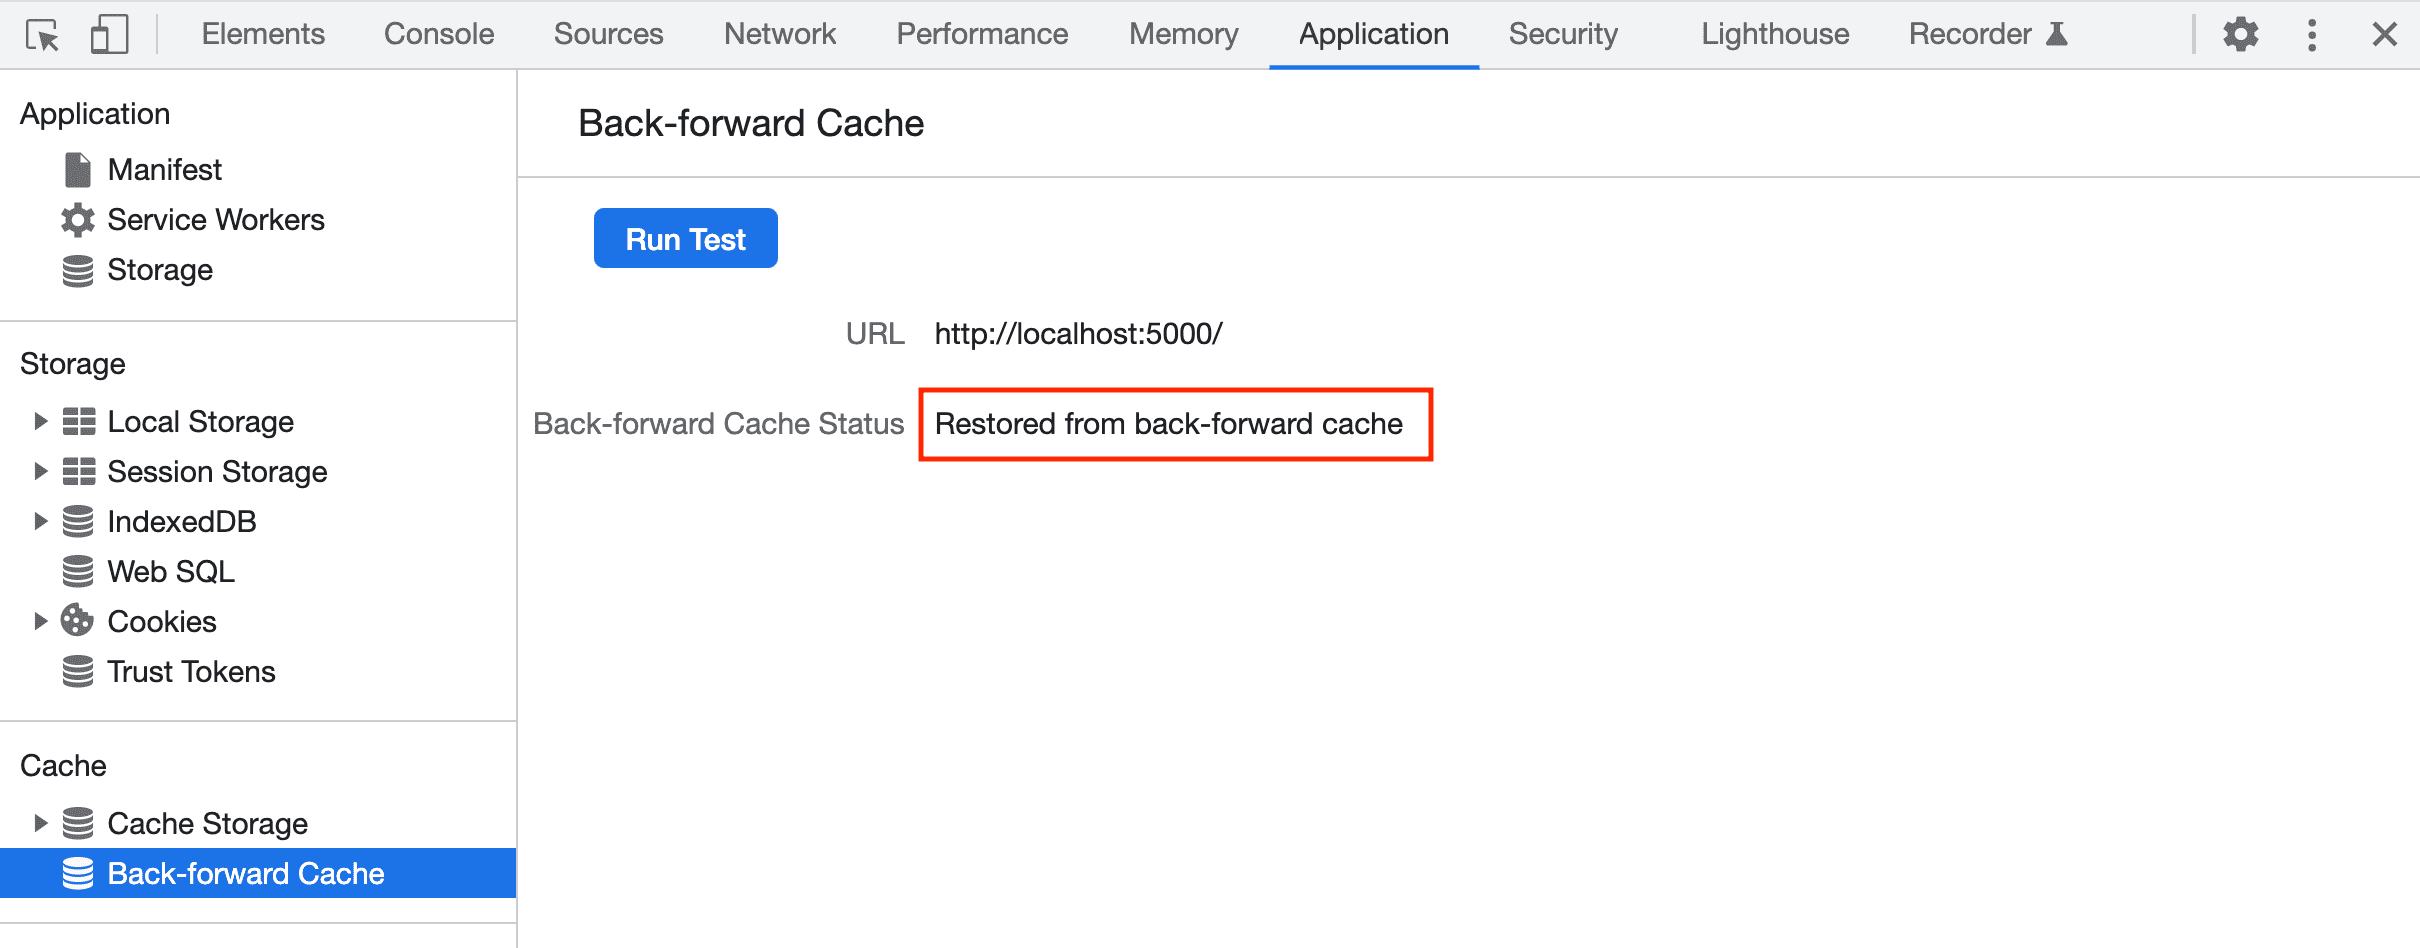 DevTools reporting a page was successfully restored from bfcache